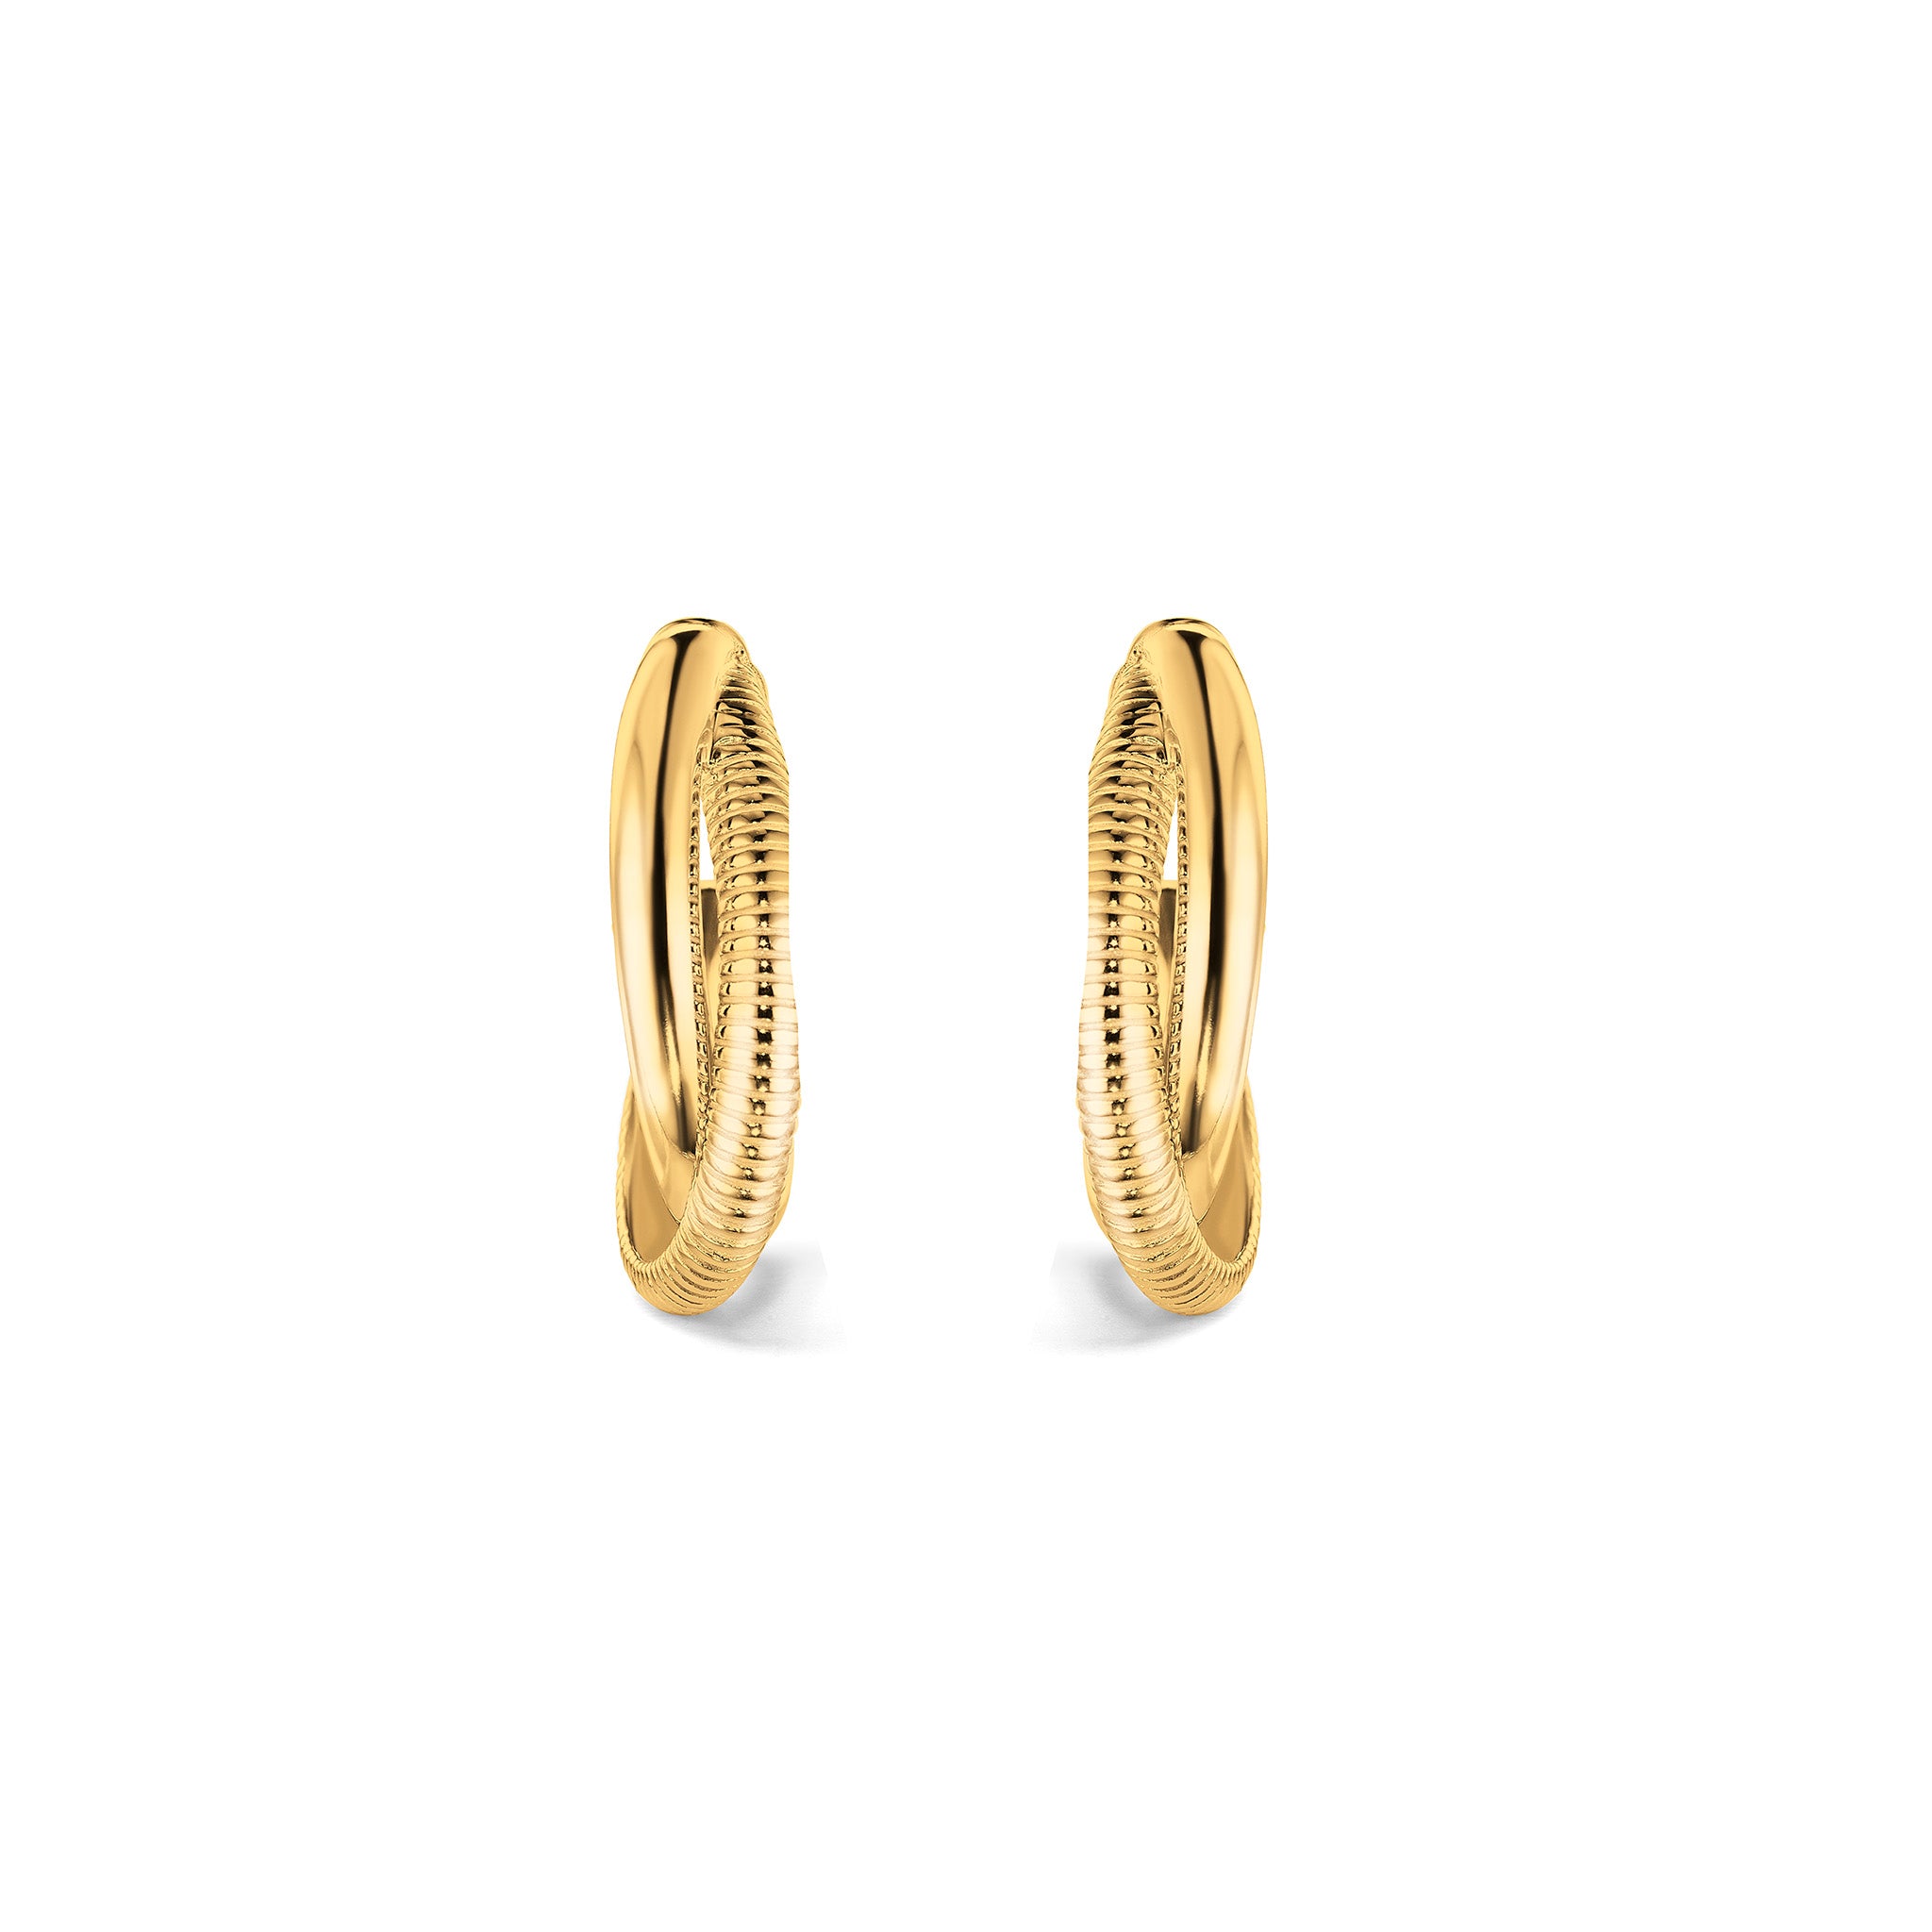 Wide Hammered Puffed Round Hoop Earrings in 14k Yellow Gold - The Black Bow  Jewelry Company